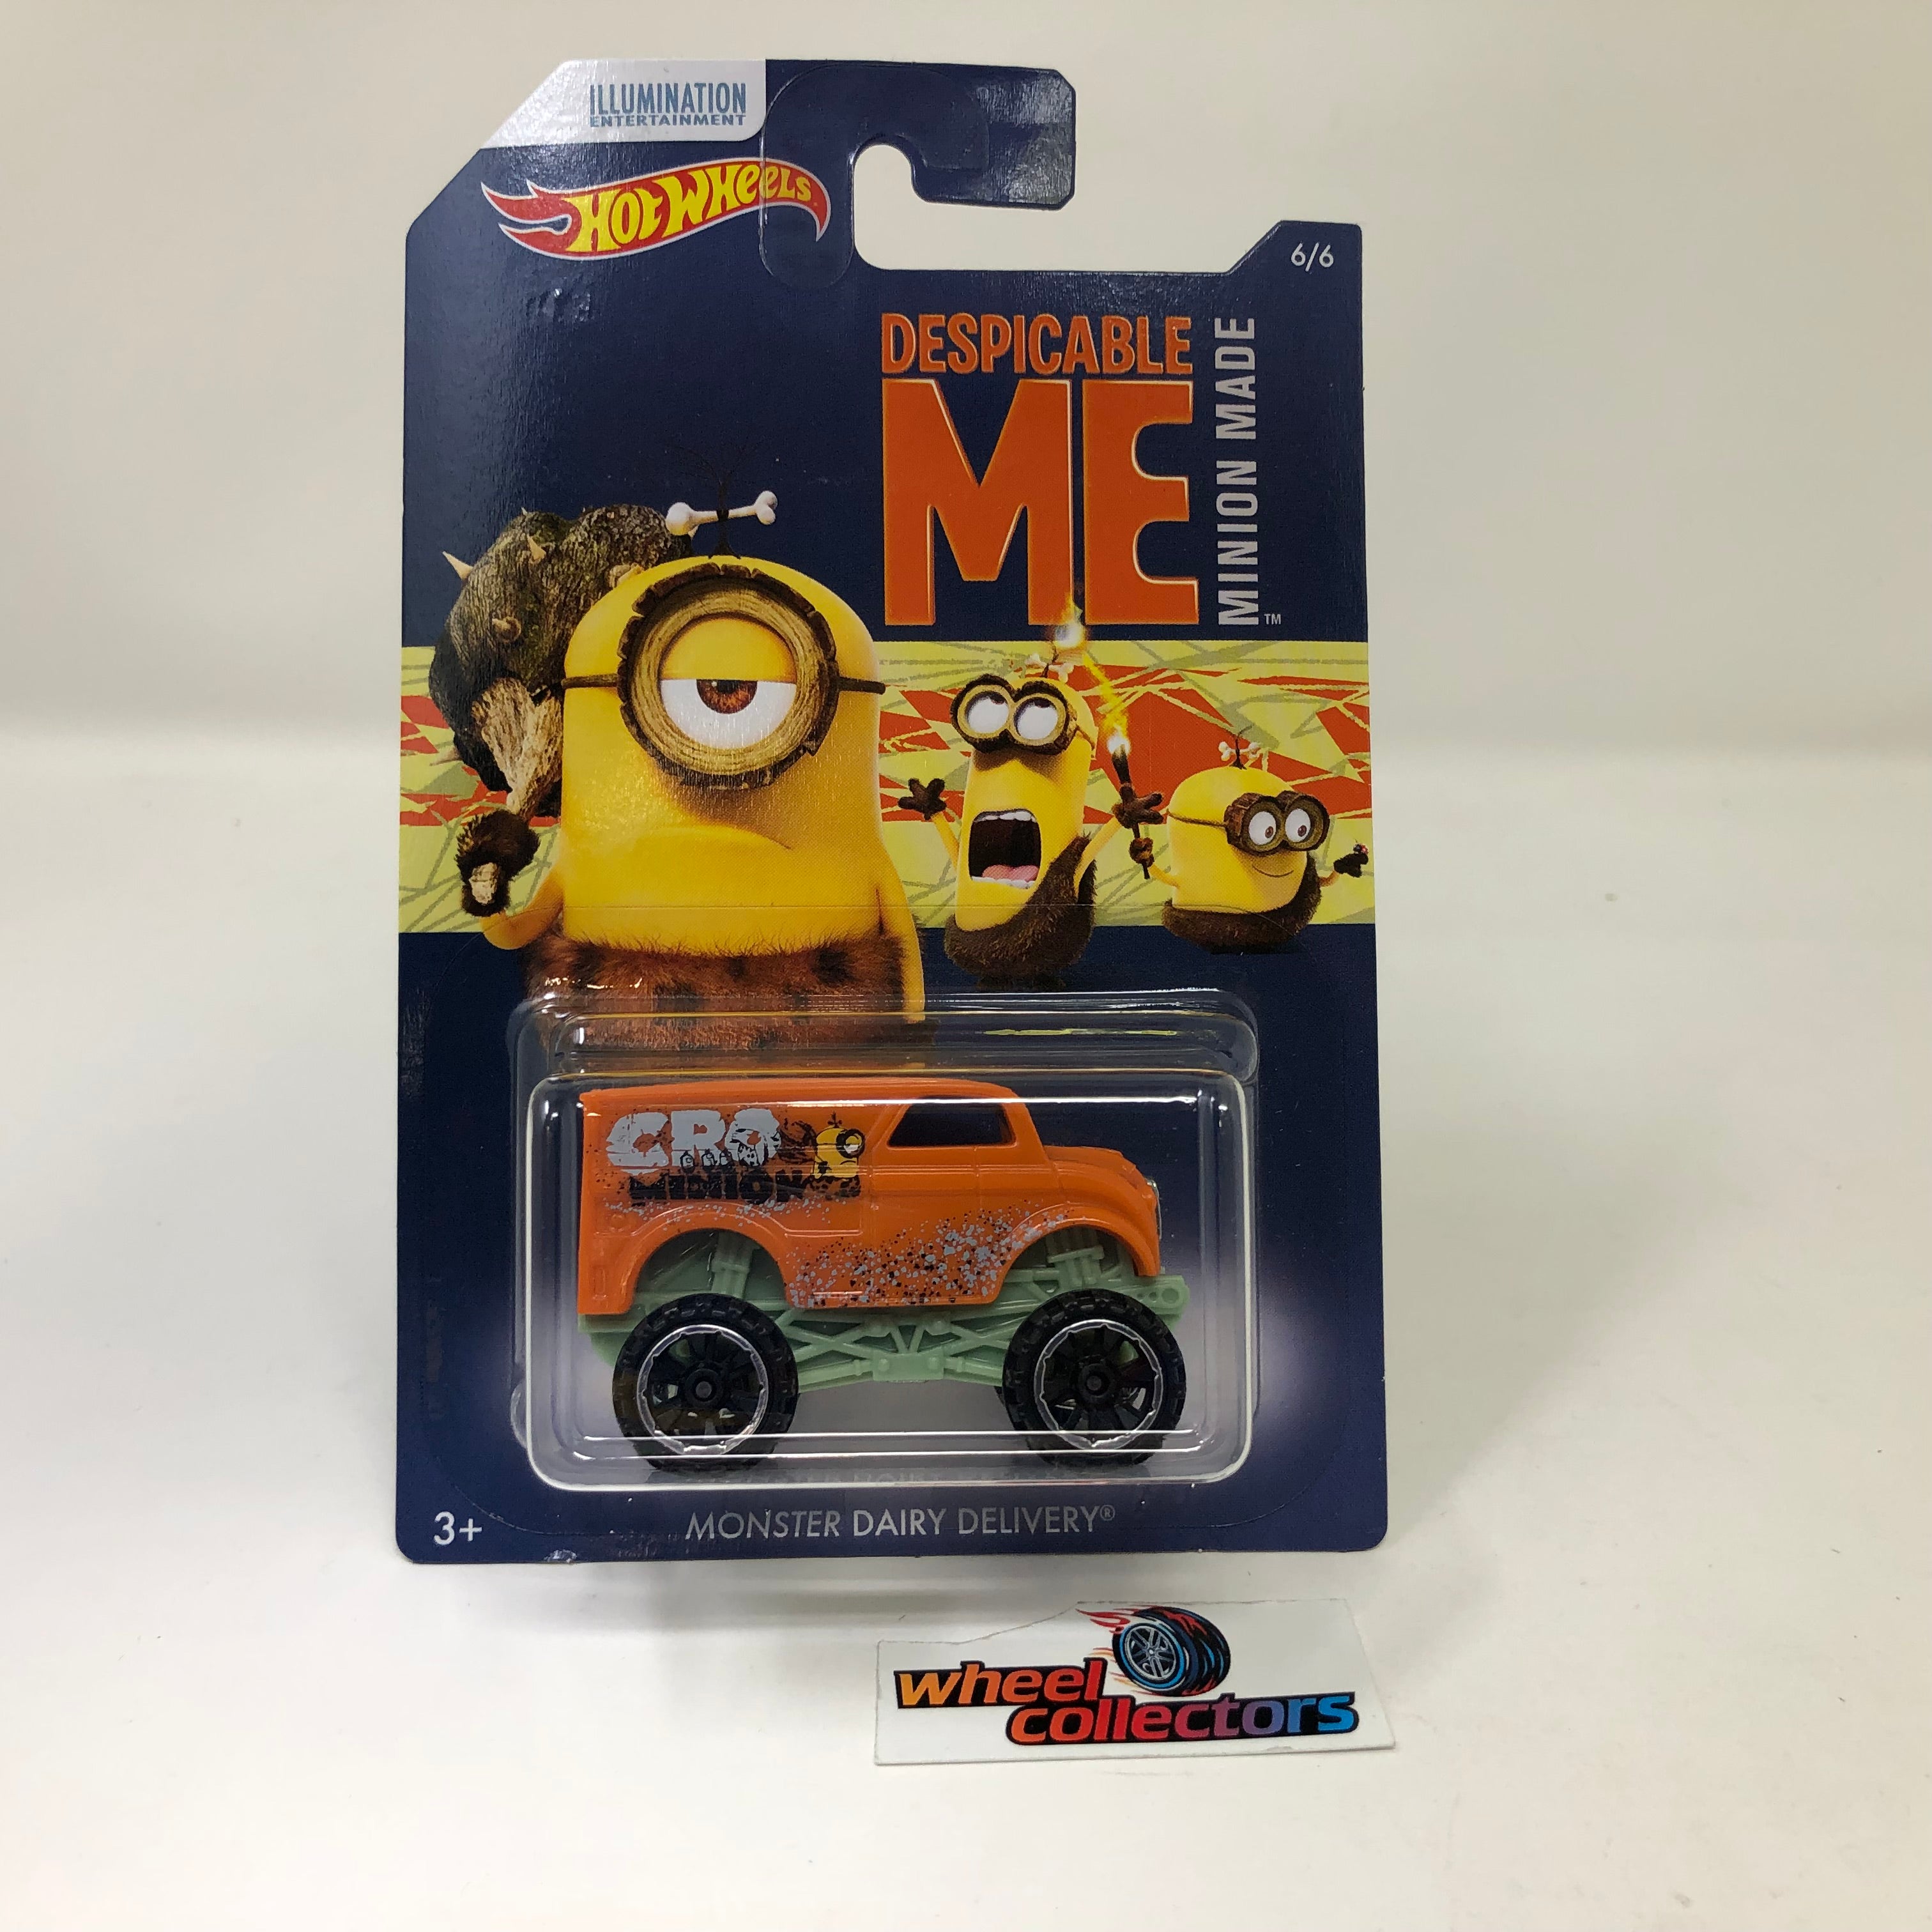 Monster Dairy Delivery * Despicable Me * Hot Wheels Store Exclusive ...